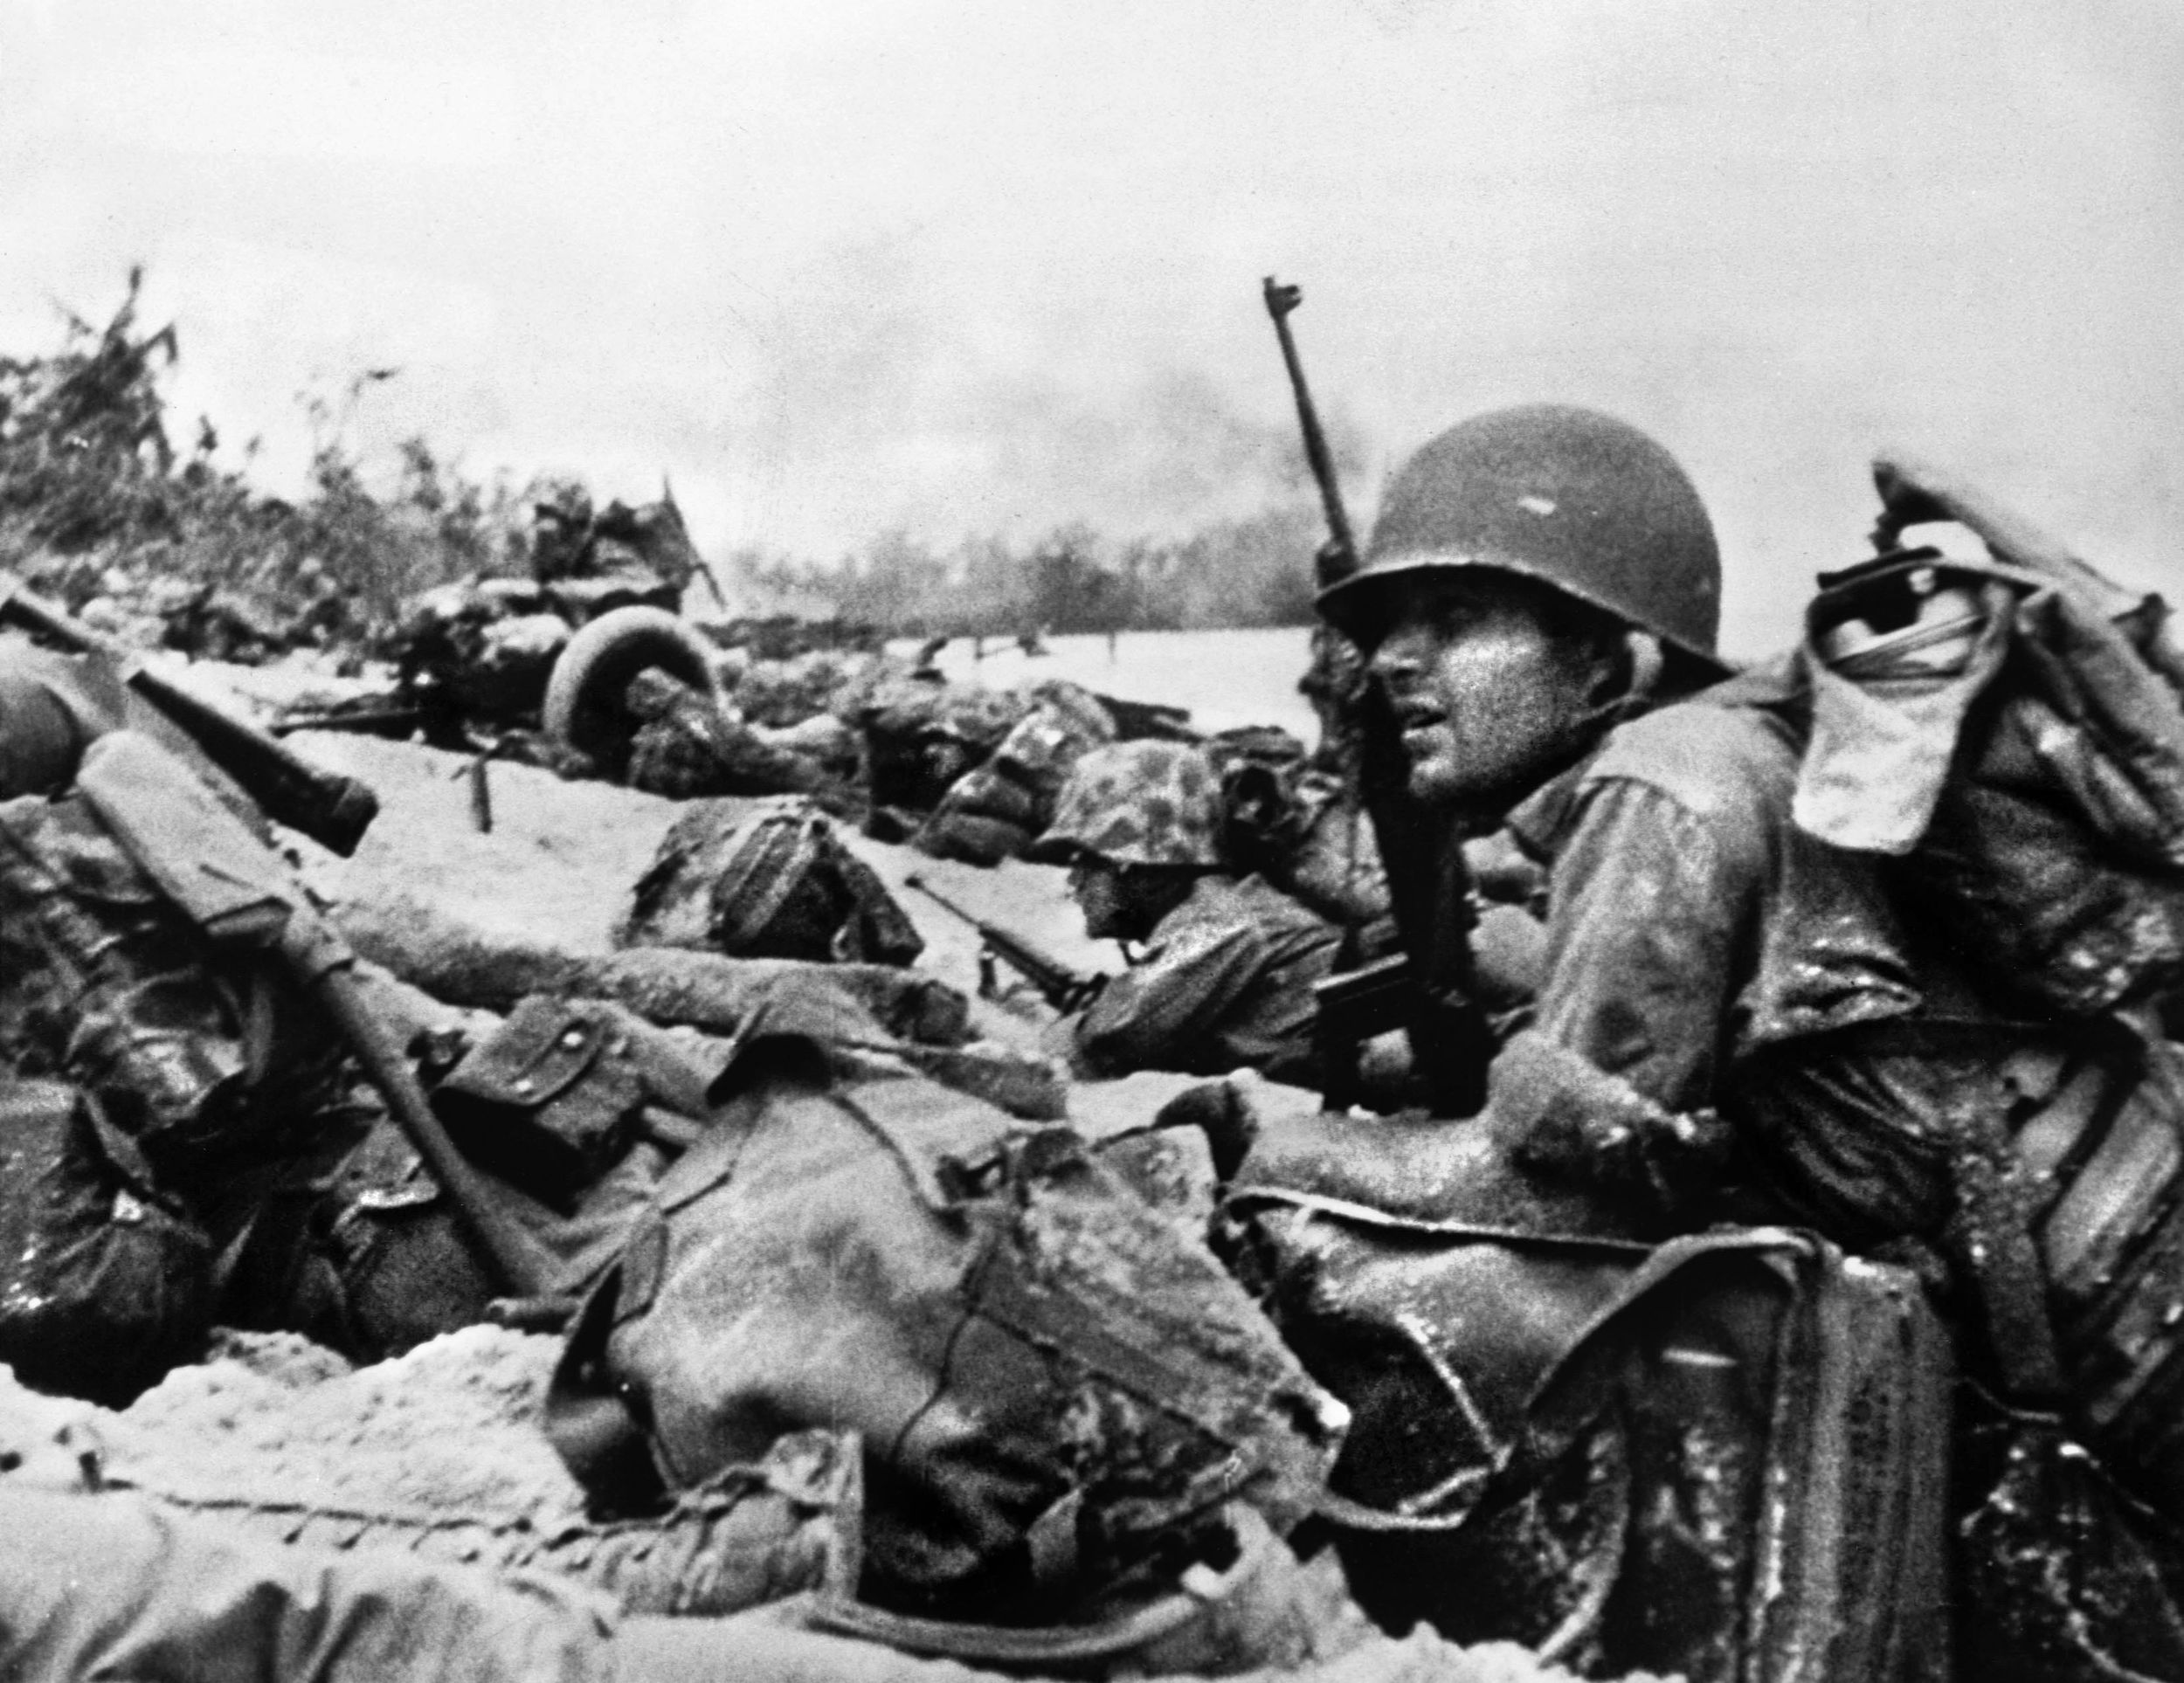 Members of the 1st, 5th and 7th Marine regiments continued to endure withering machine gun, mortar and artillery fire after storming the beach.